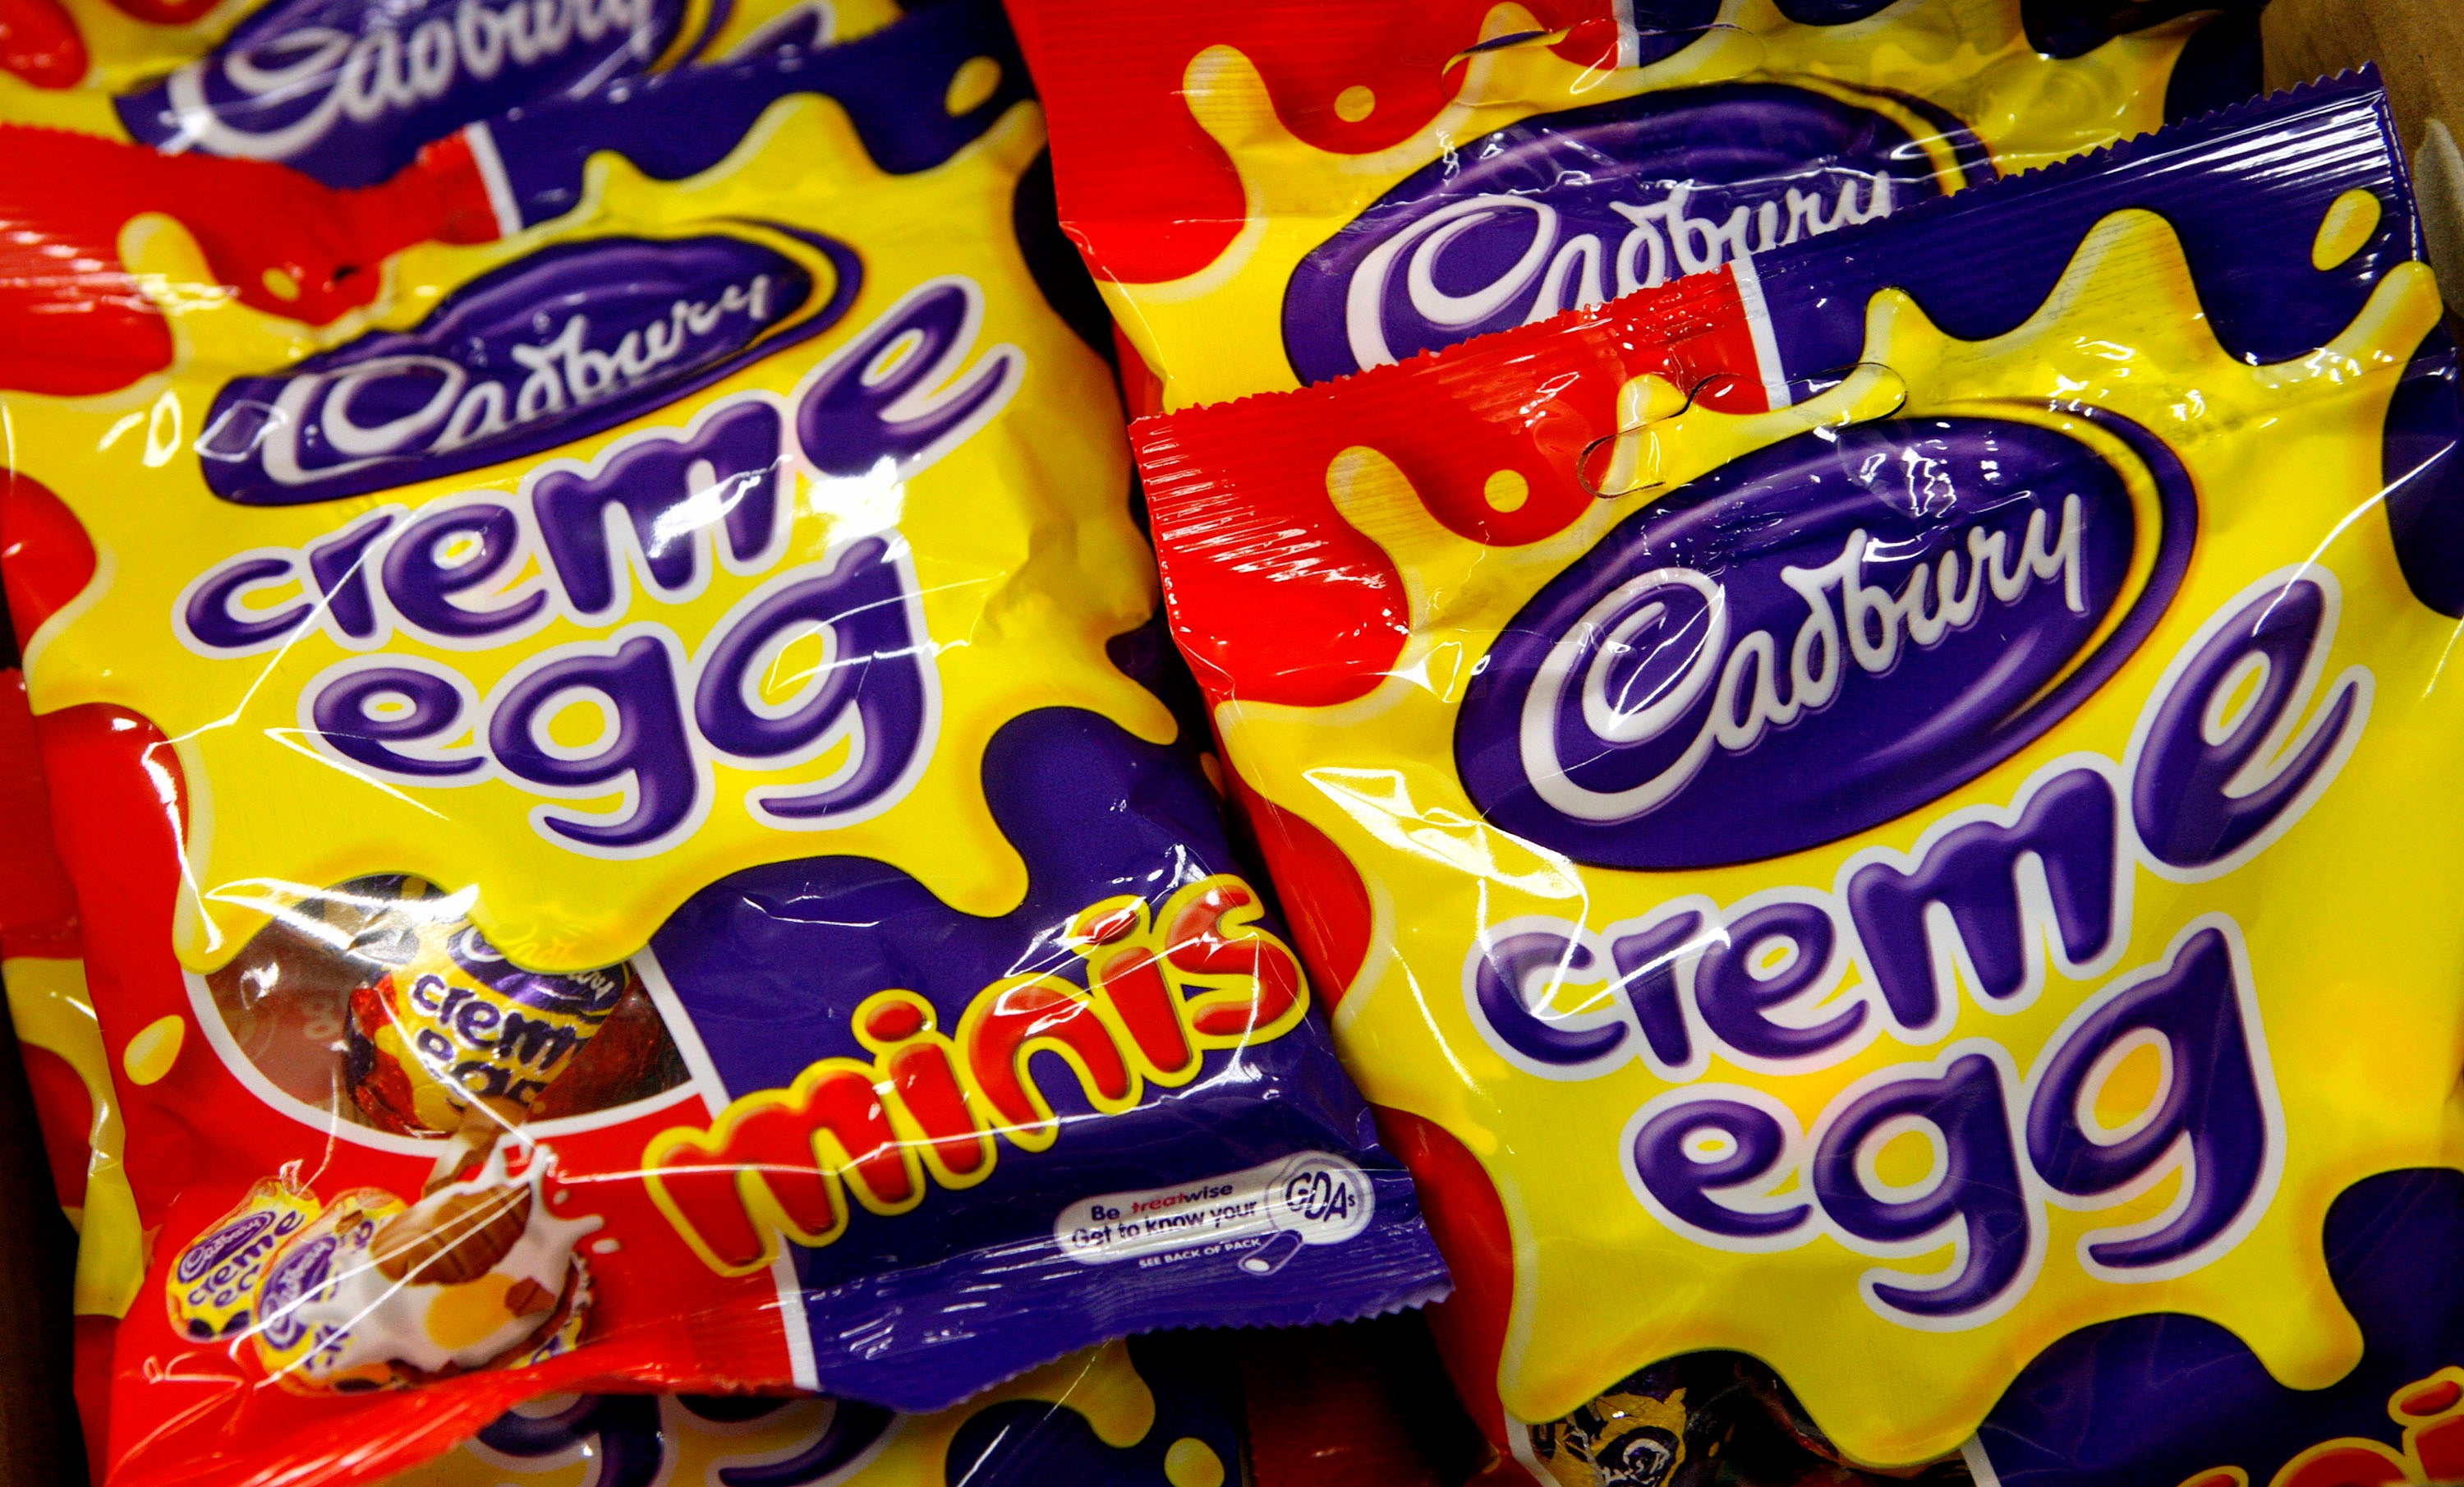 British thief admits to stealing nearly 200,000 chocolate Easter eggs